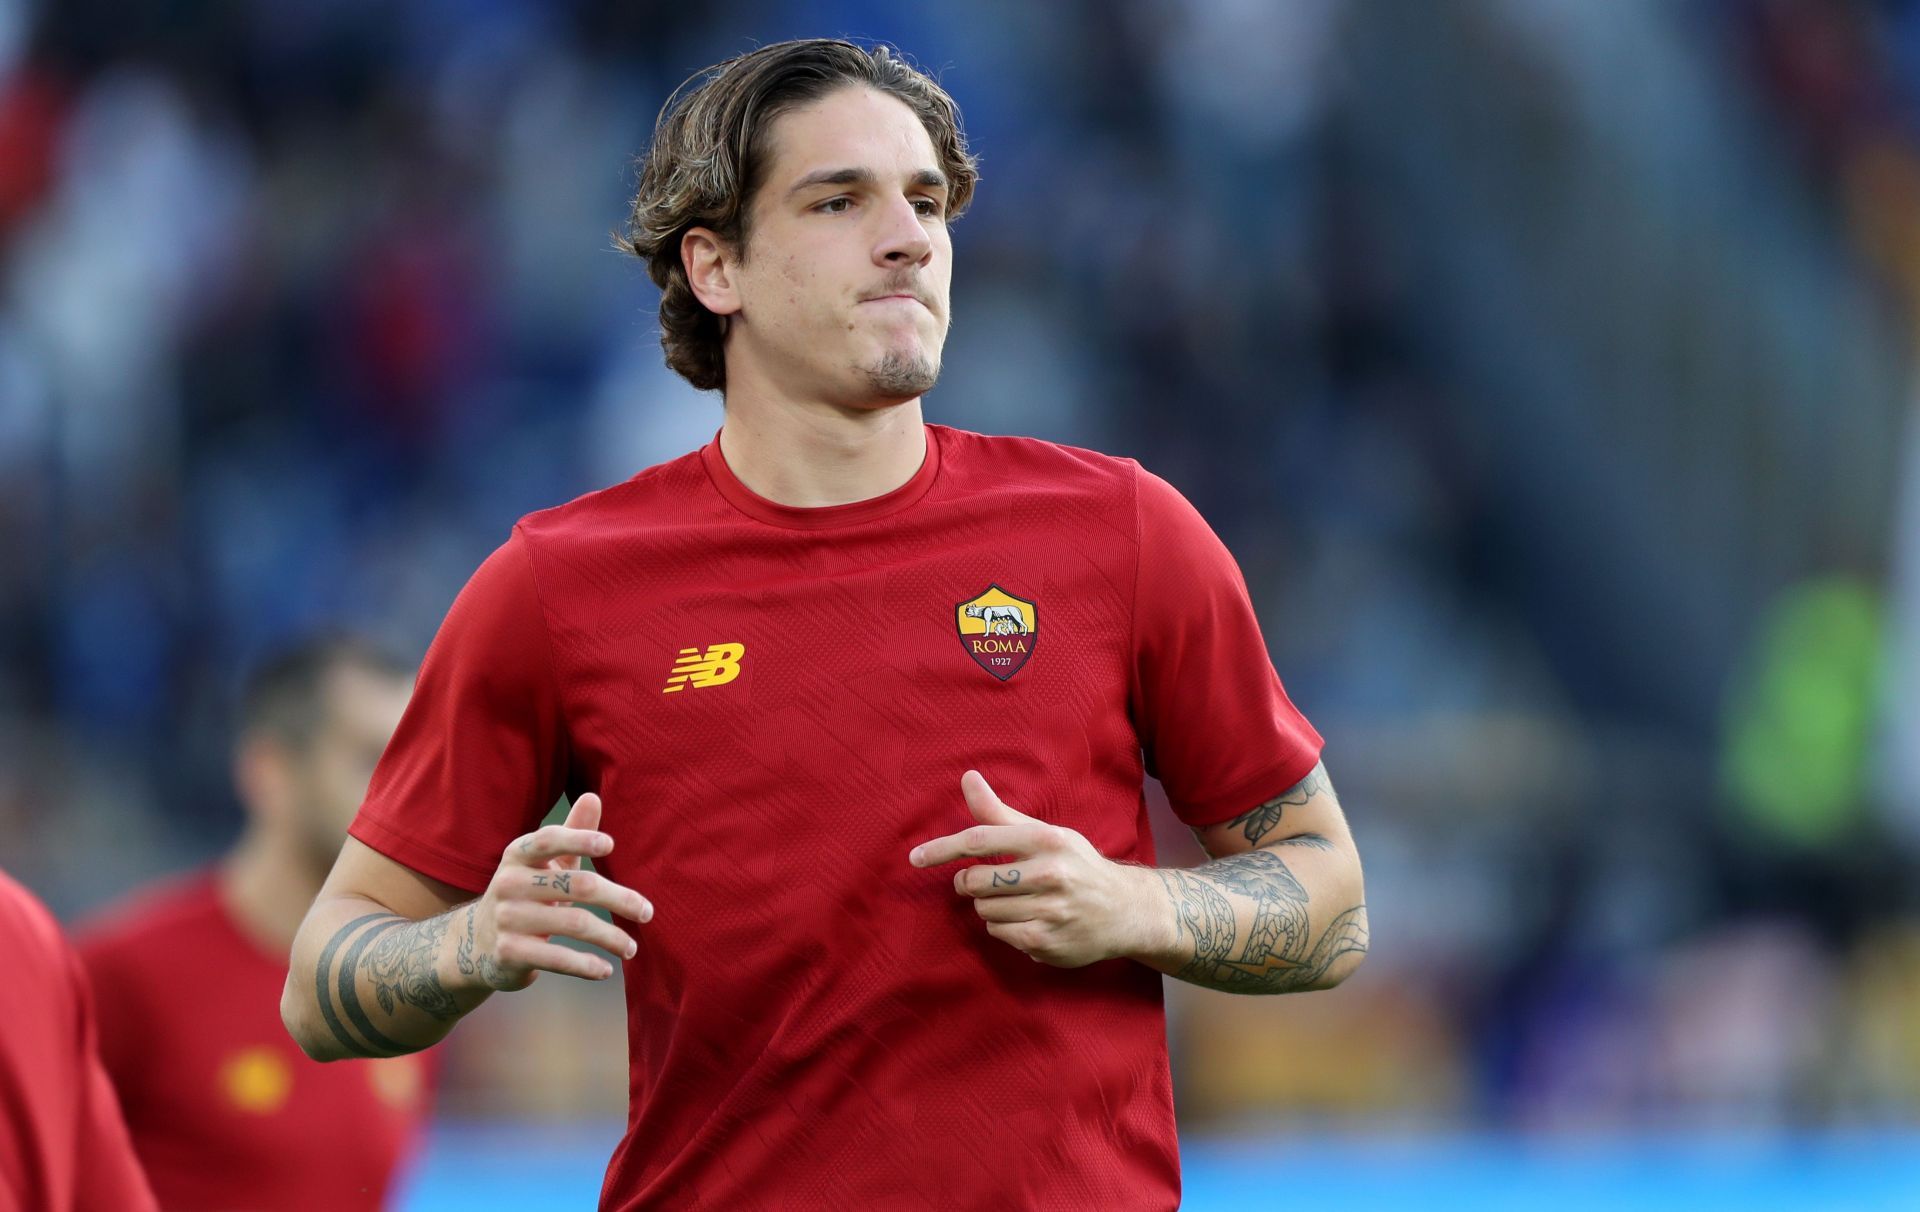 Zaniolo has the potential to become a top player